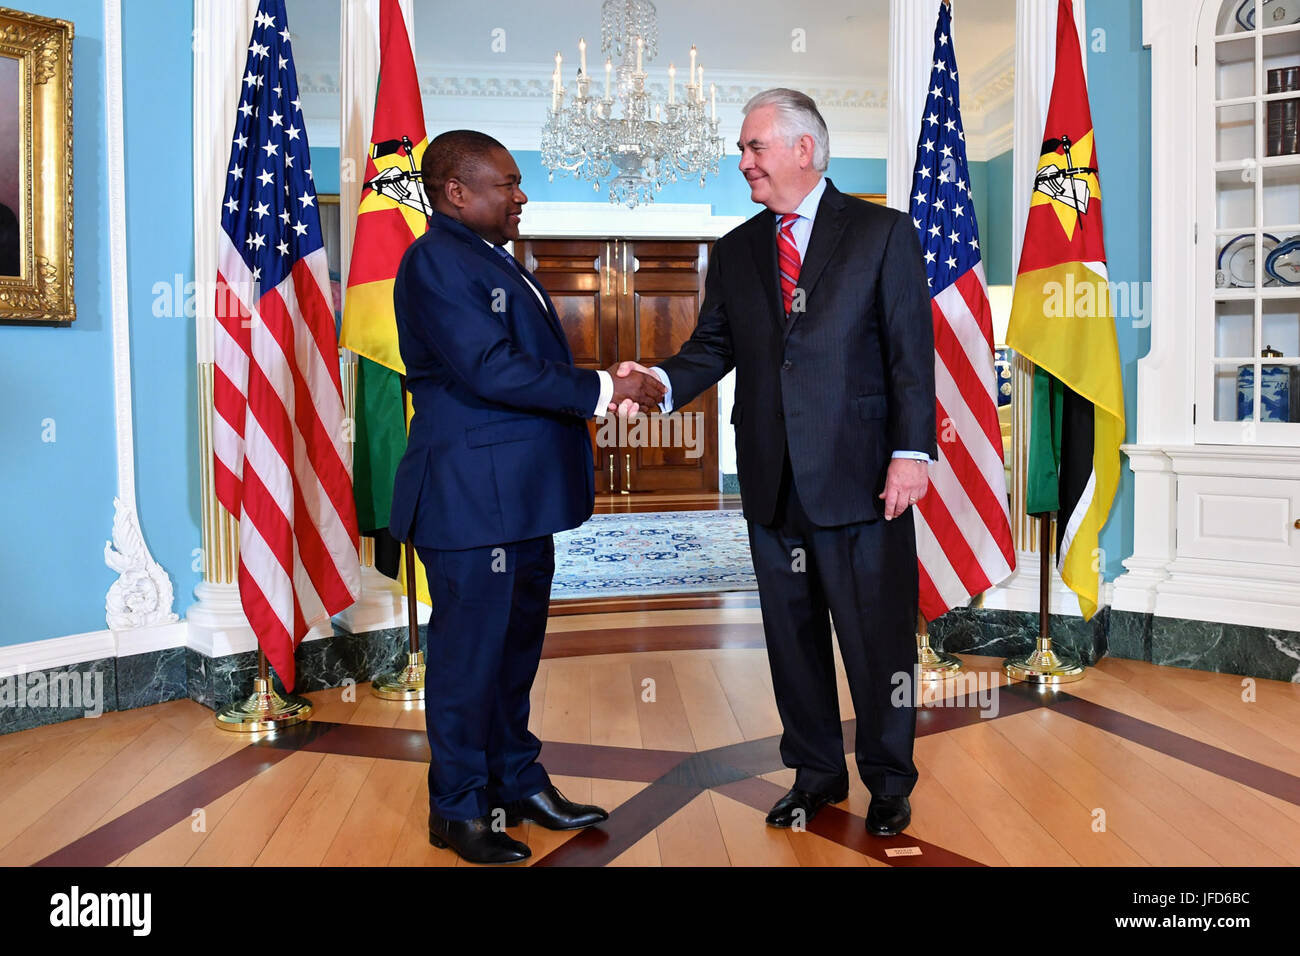 U.S. Secretary of State Rex Tillerson shakes hands with Mozambique President Filipe Jacinto Nyusi before their bilateral meeting at the U.S. Department of State in Washington, D.C., on June 14, 2017. Stock Photo